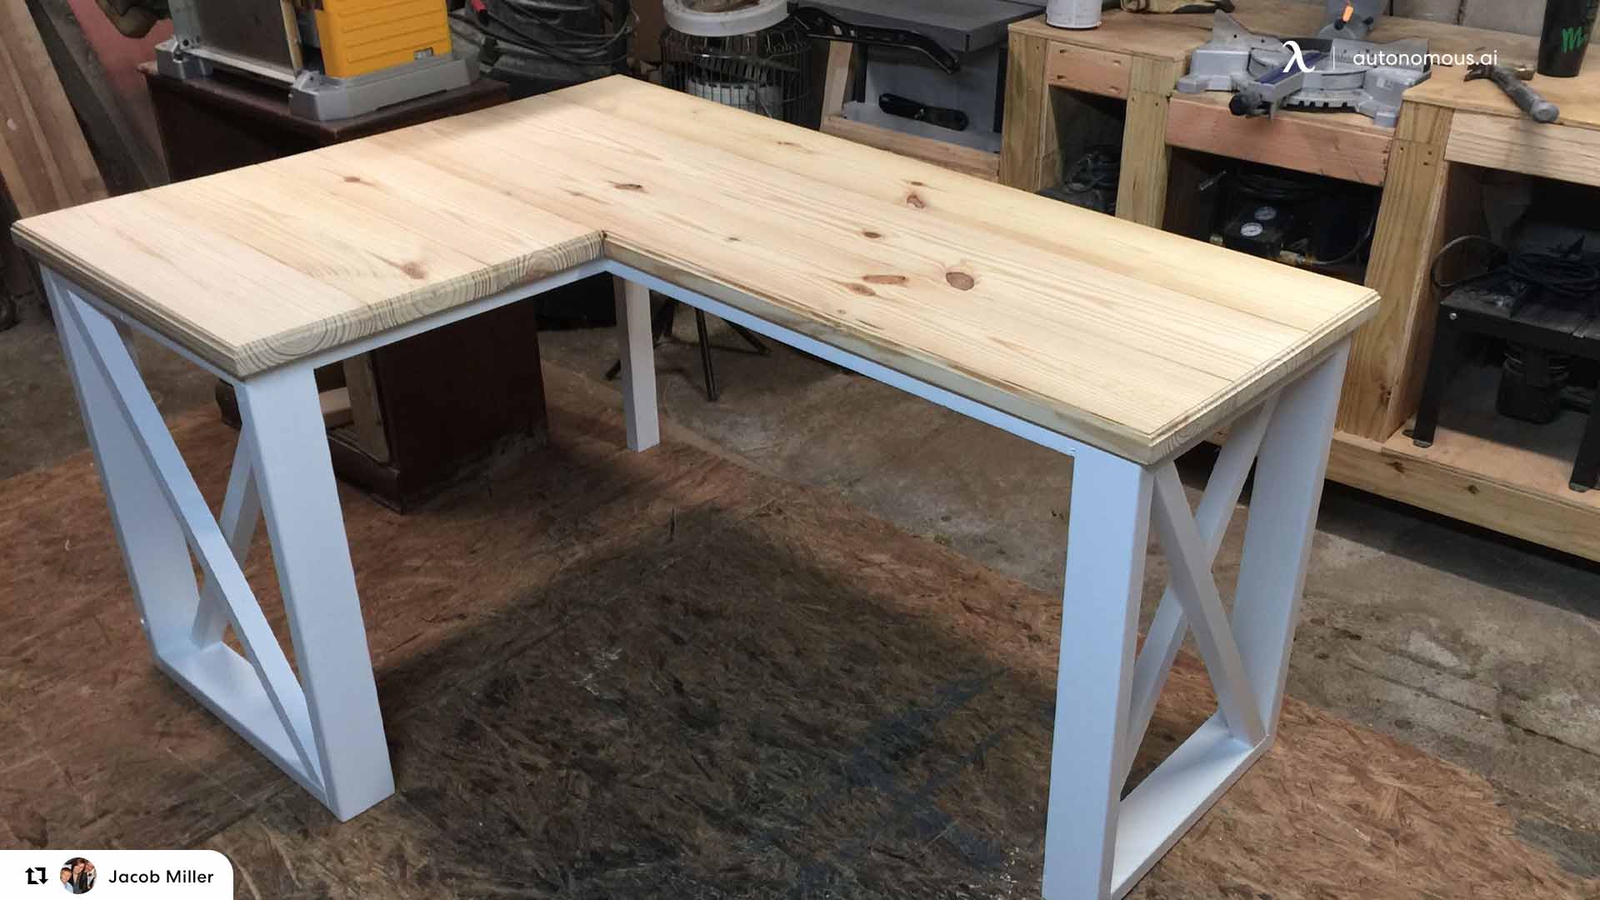 How to Make a DIY L-Shaped Desk at Home